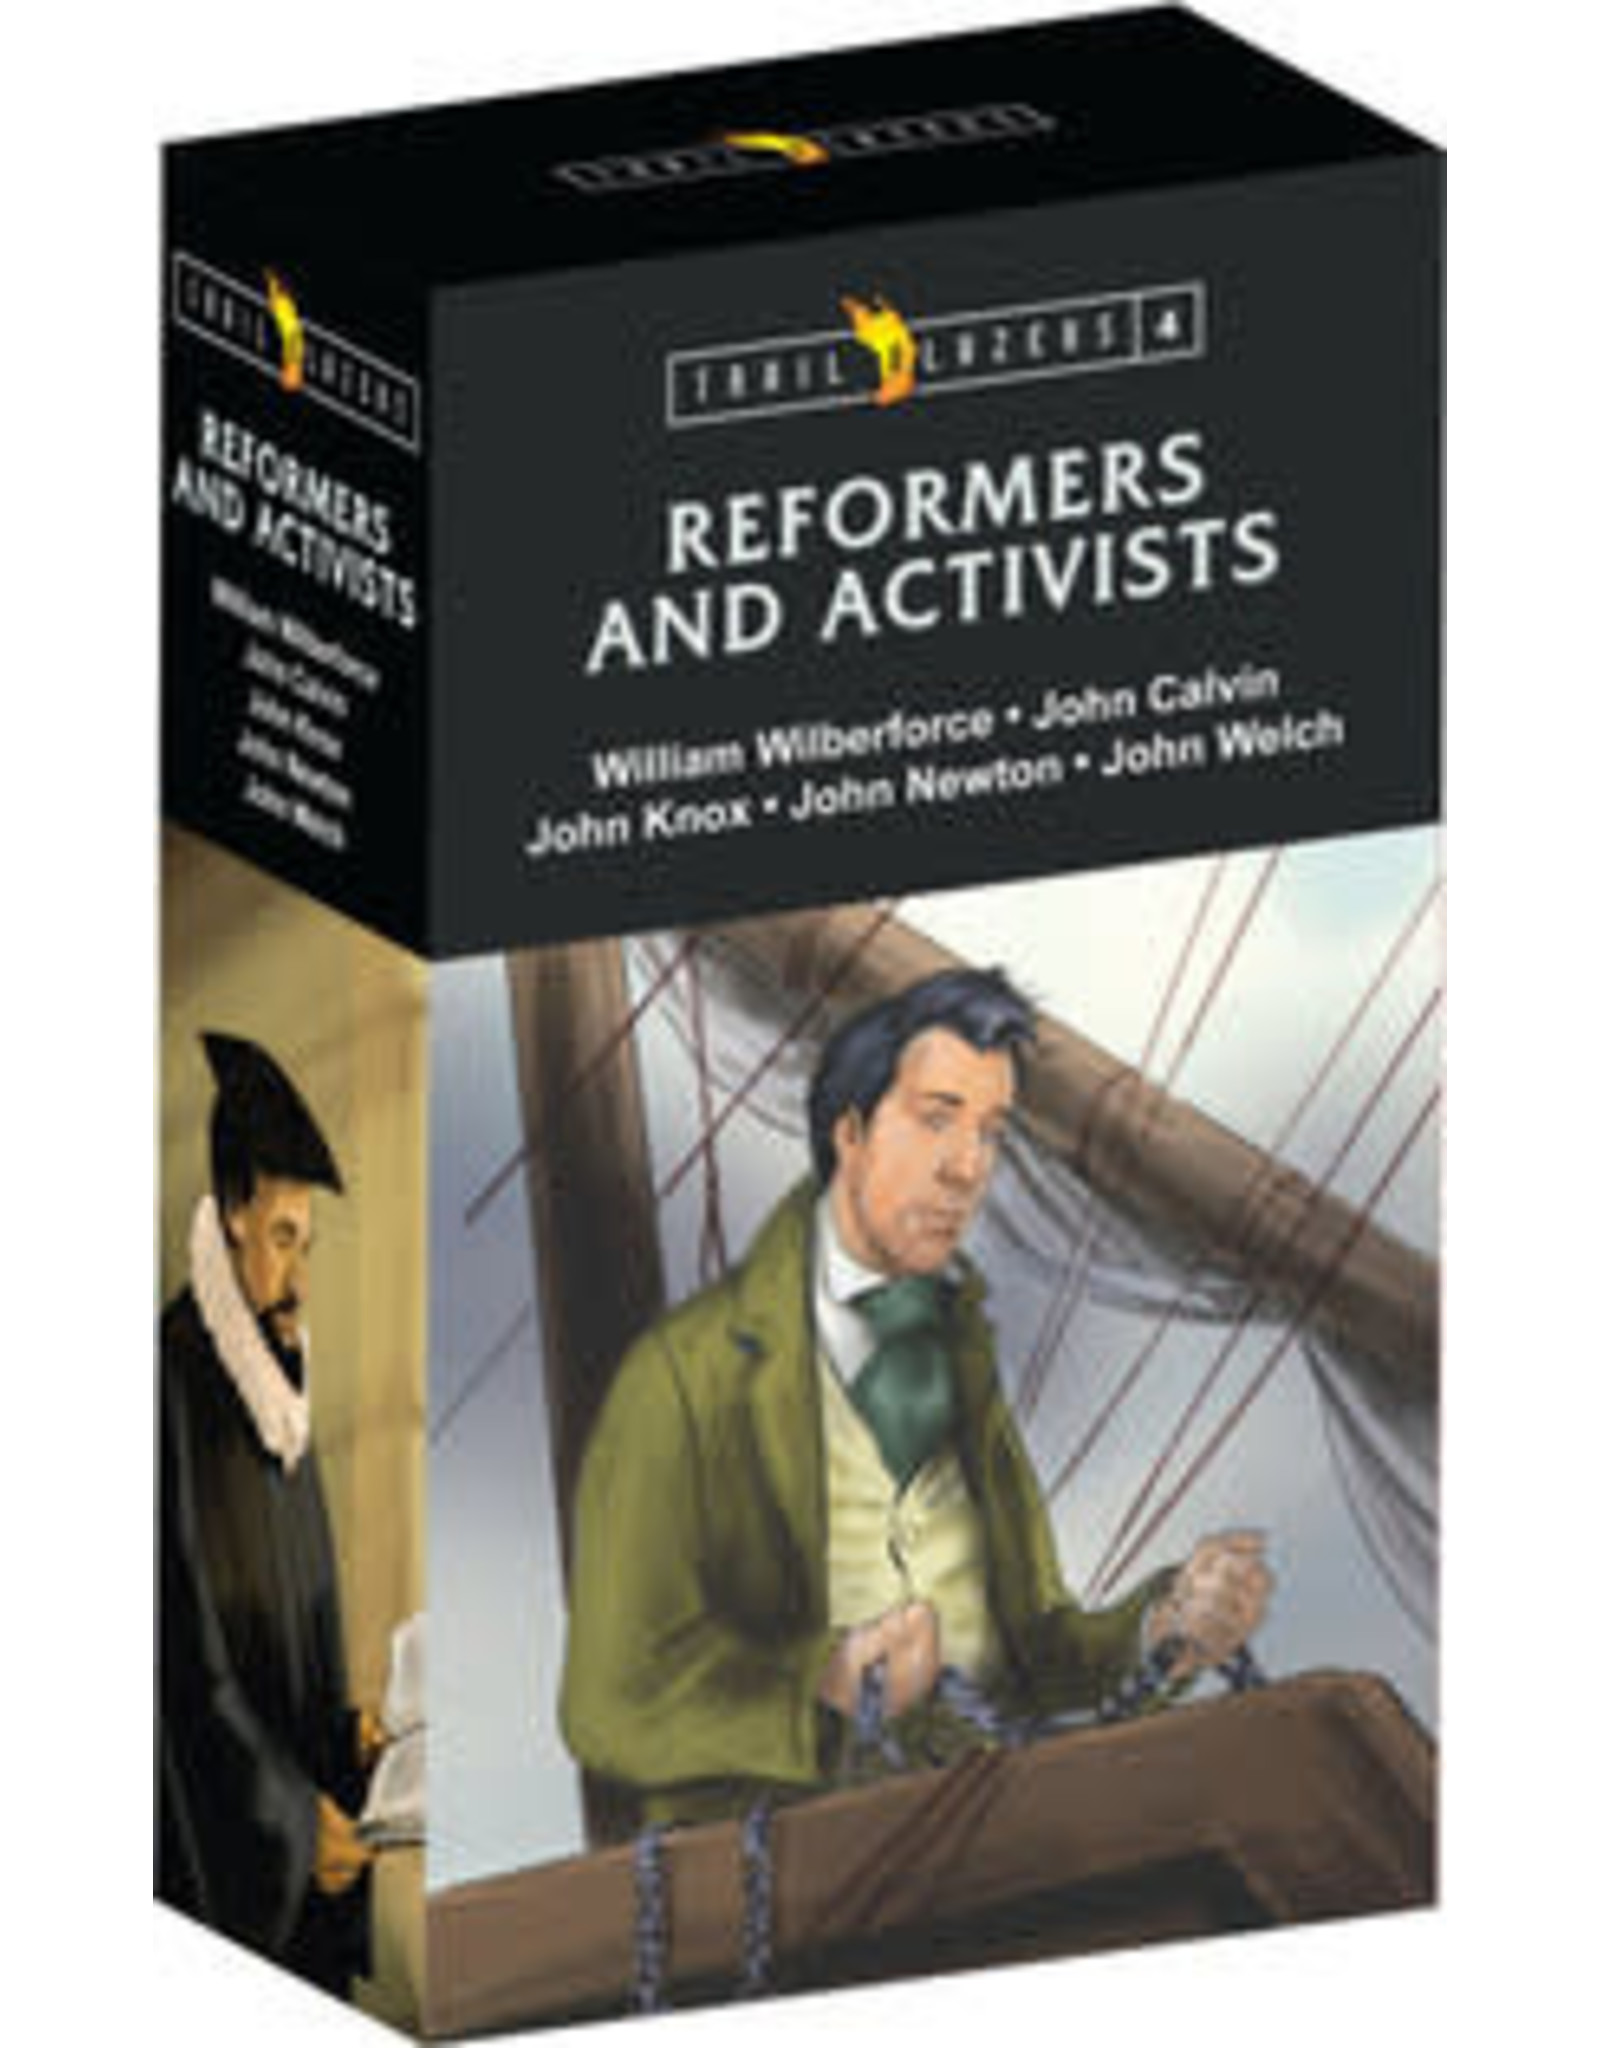 Wilberforce, Calvin, Knox, Newton, Welch Trailblazers Box Set 4:  Reformers and Activists